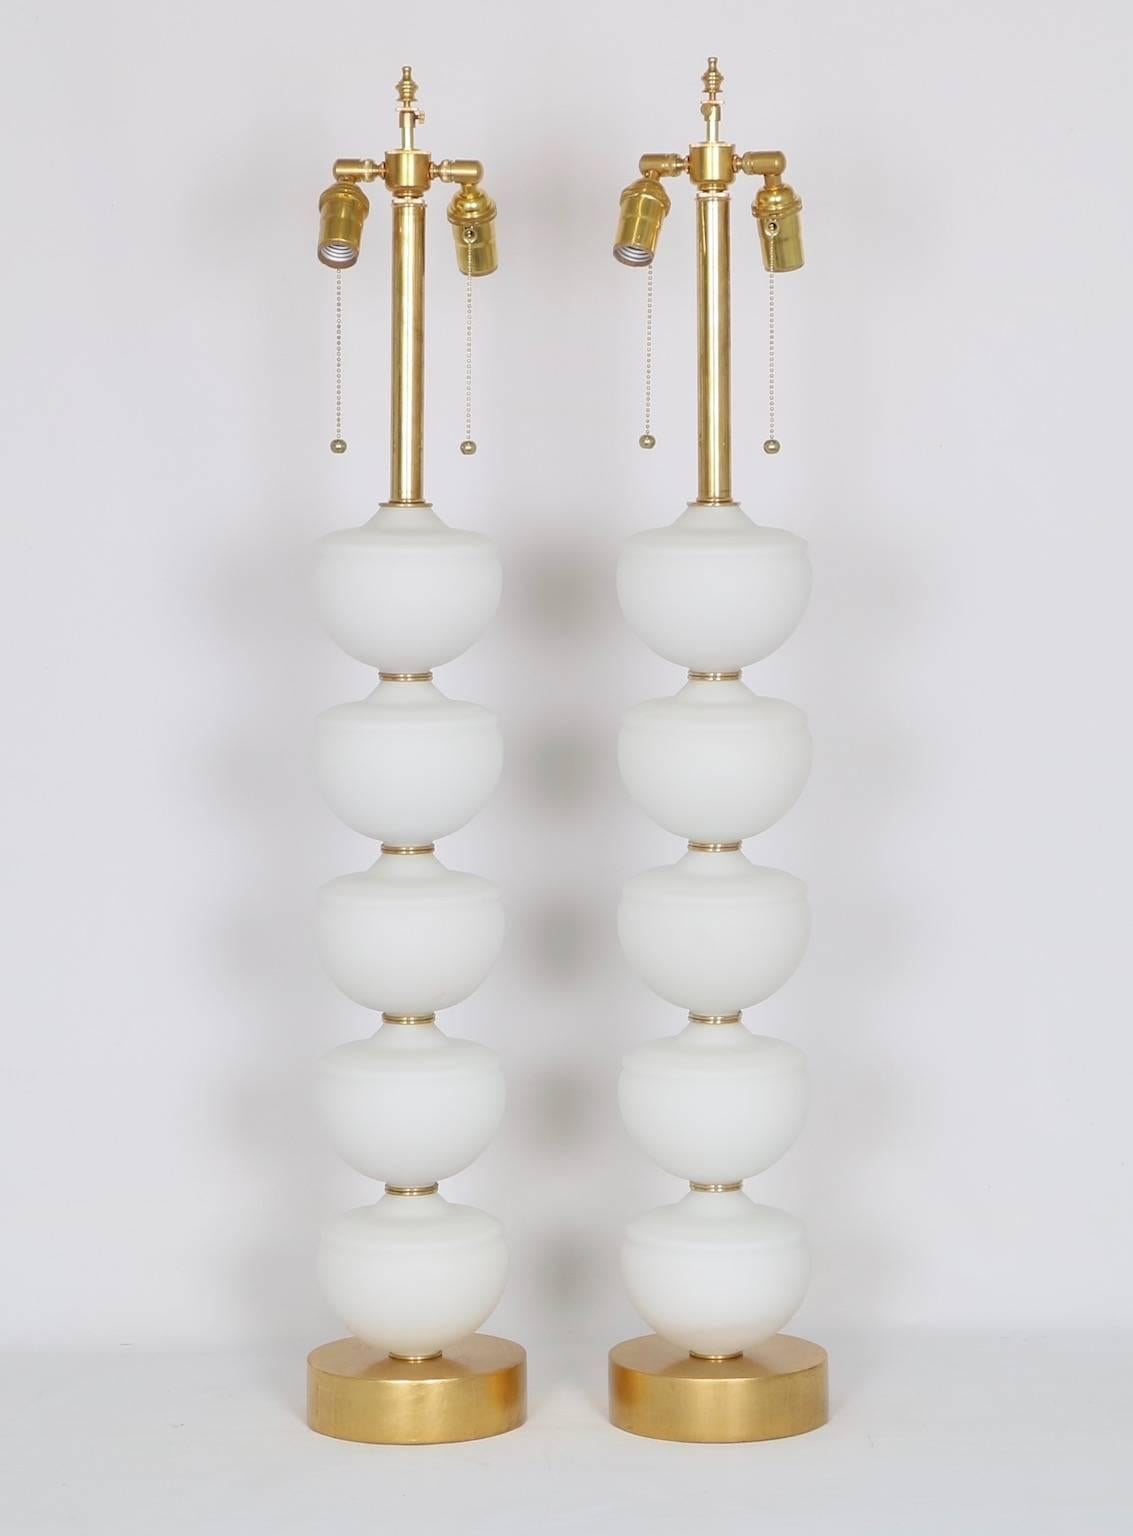 Pair of Hollywood Regency midcentury Murano glass lamps. Comprised of stacked frosted glass fonts mounted on a glitwood base. Fully restored with new wiring and hardware, including a double socket cluster. The noted height is to the finial. the